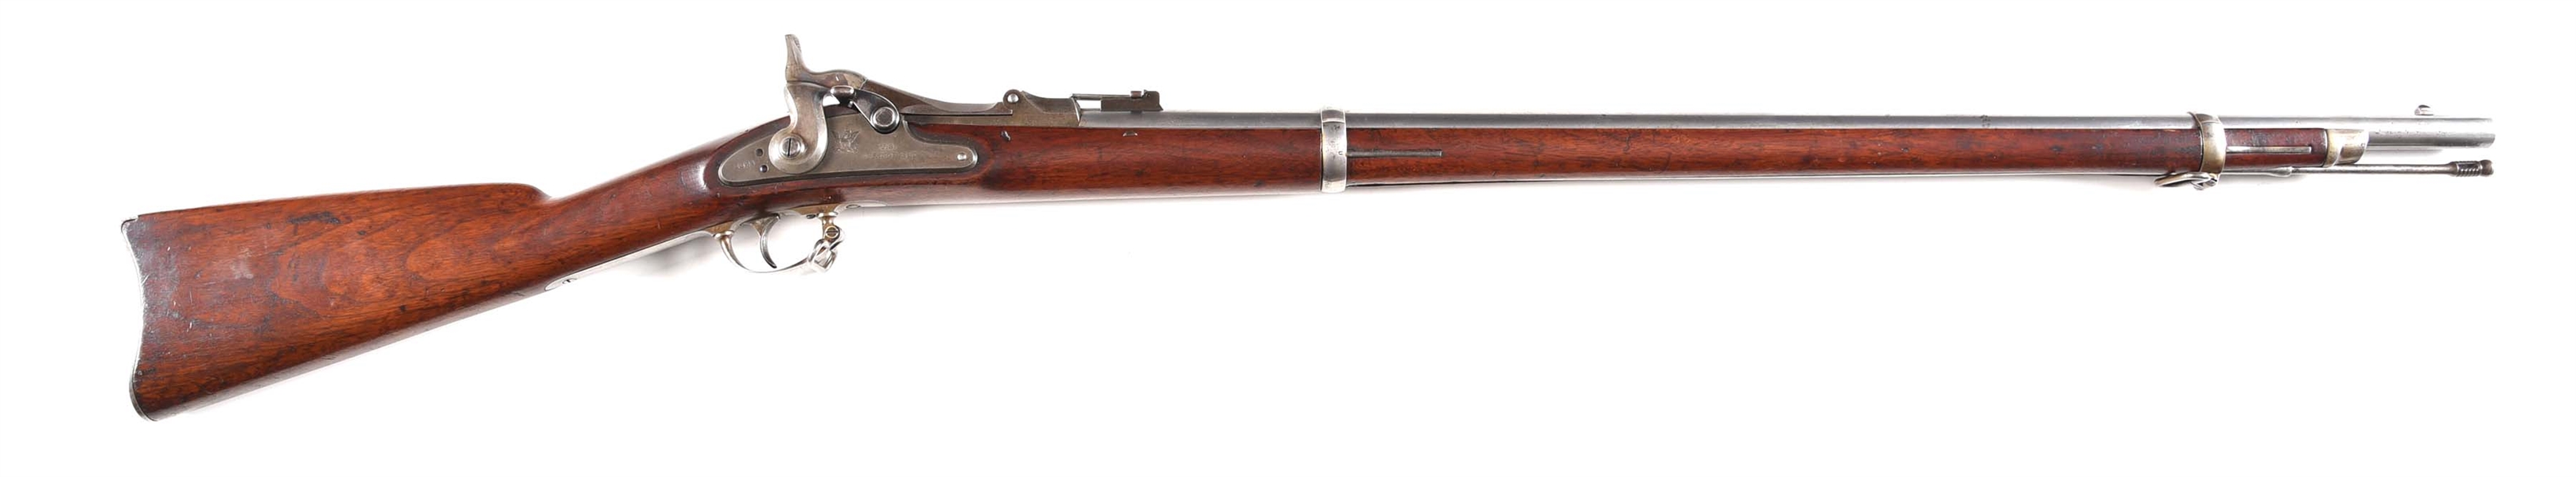 (A) US SPRINGFIELD MODEL 1870 TRAPDOOR RIFLE DATED 1870.